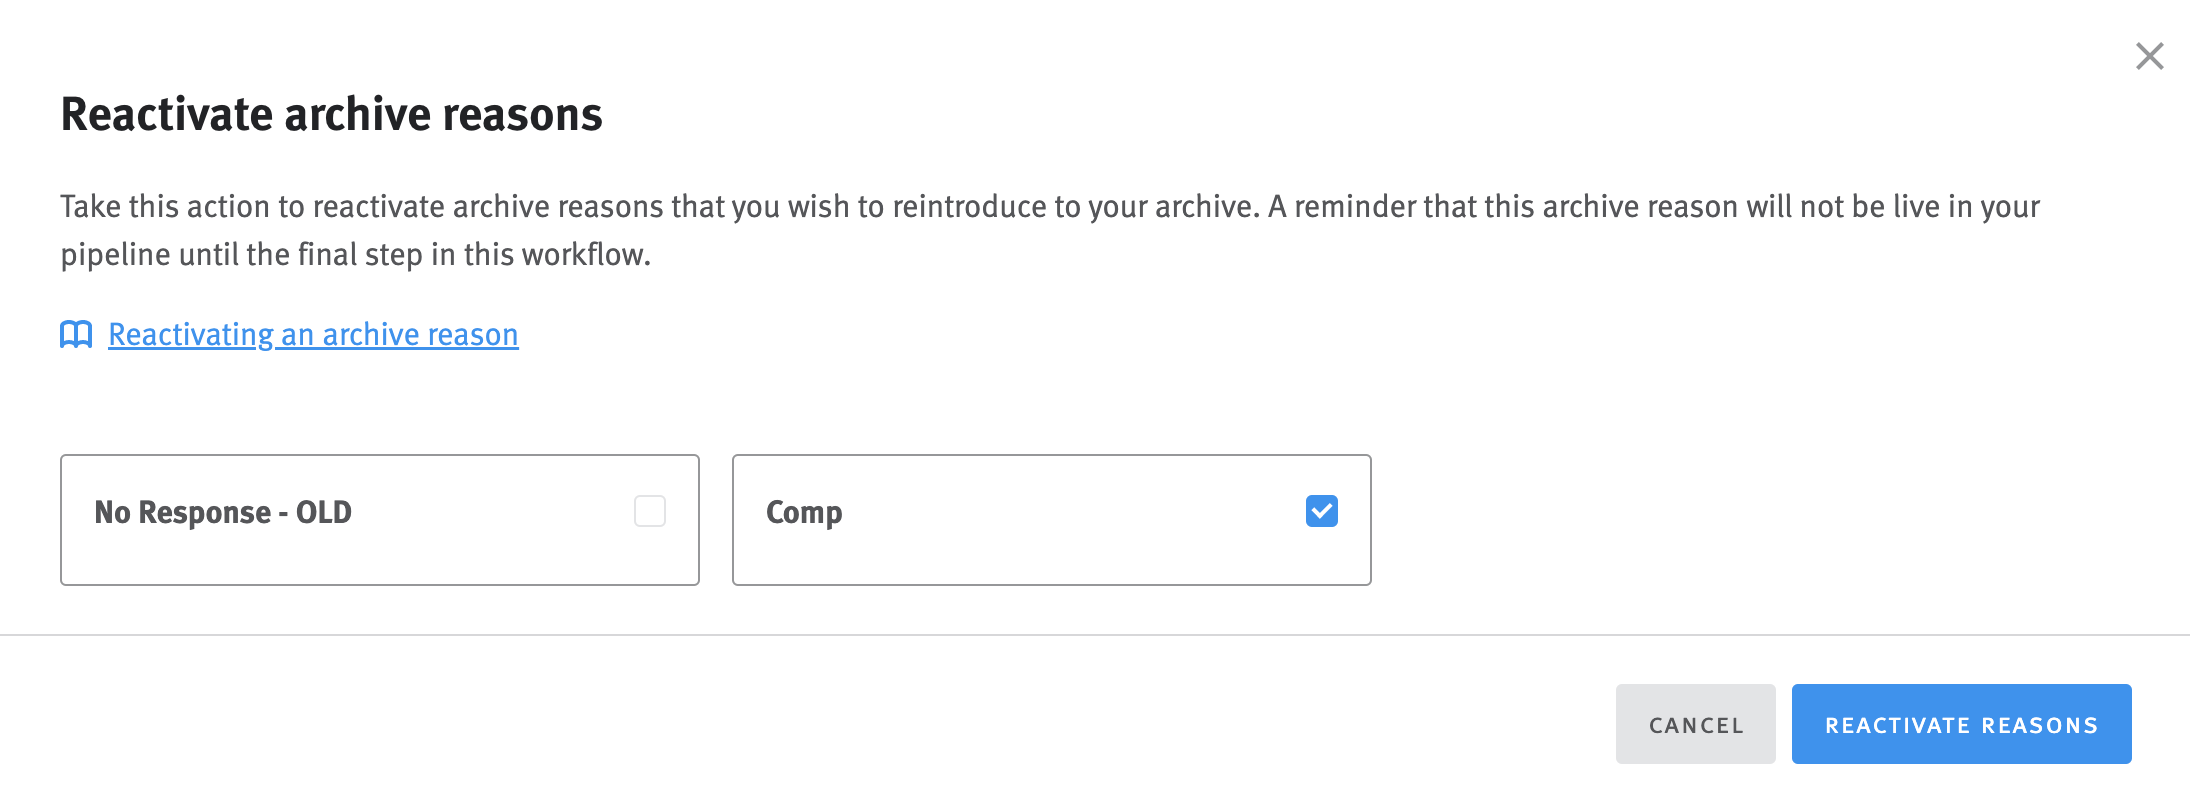 Reactivate archive reasons modal with one archive reason selected.